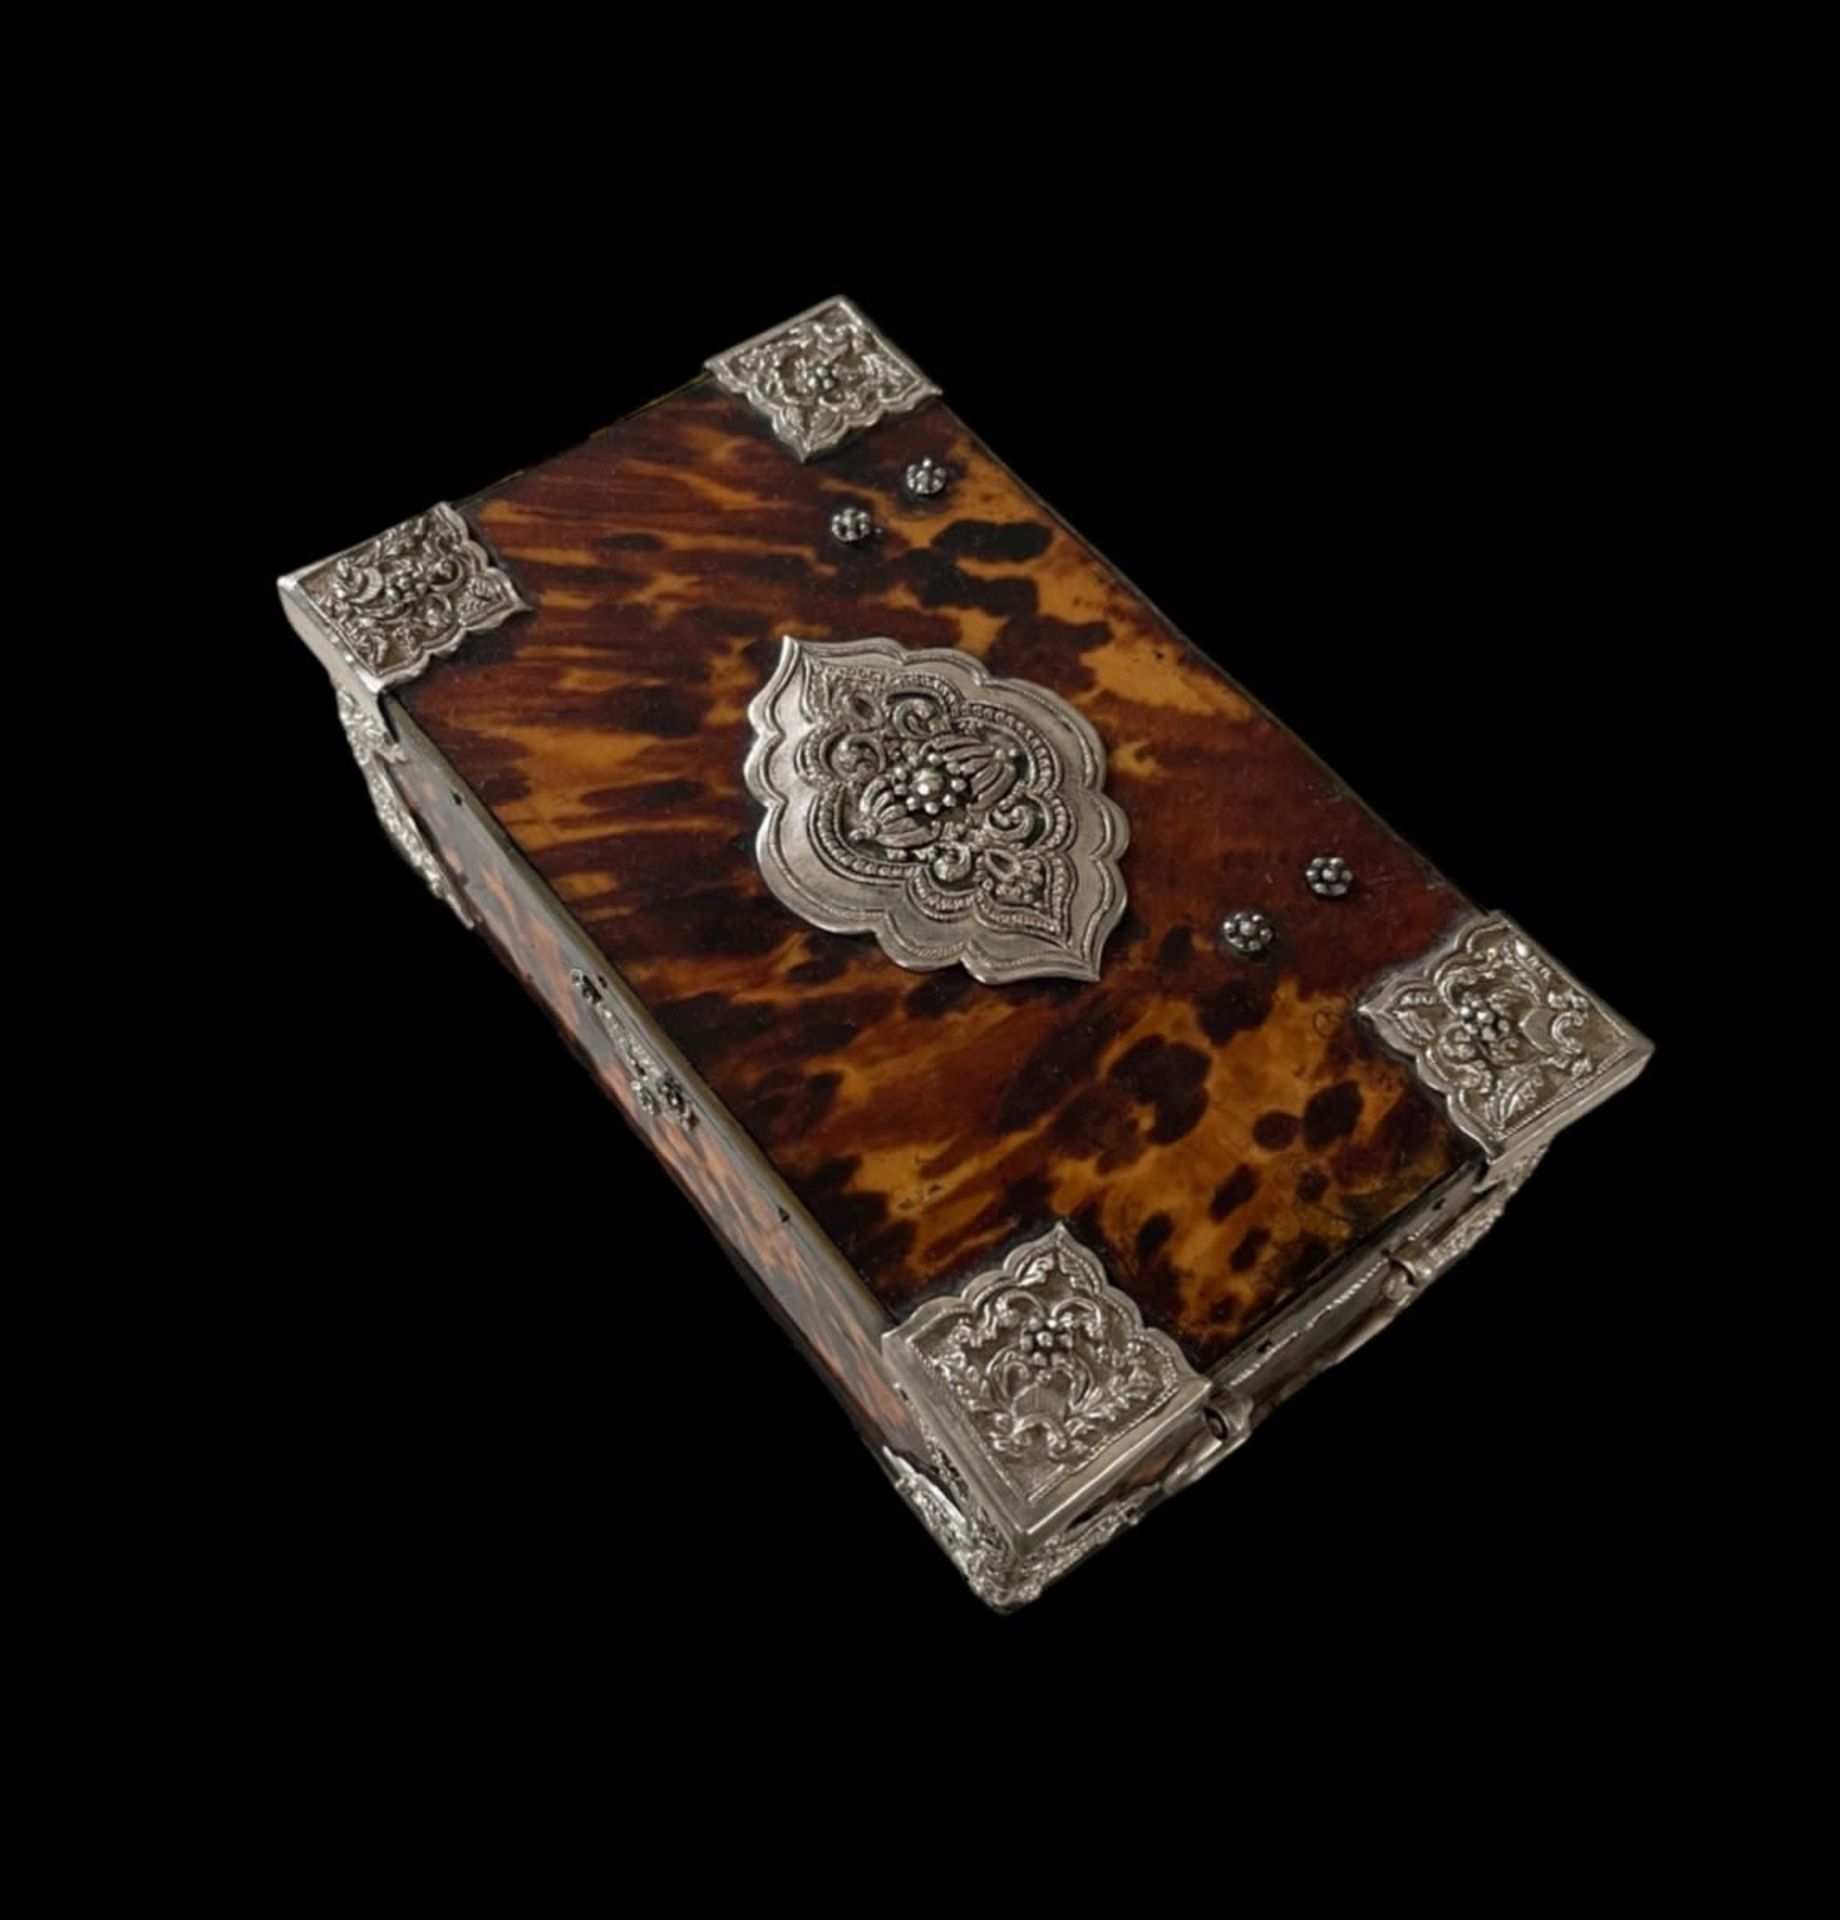 Exquisite Dutch colonial "Sirih" Tea Box in tortoiseshell and embossed silver, Batavia, Indonesia, 1 - Image 2 of 7